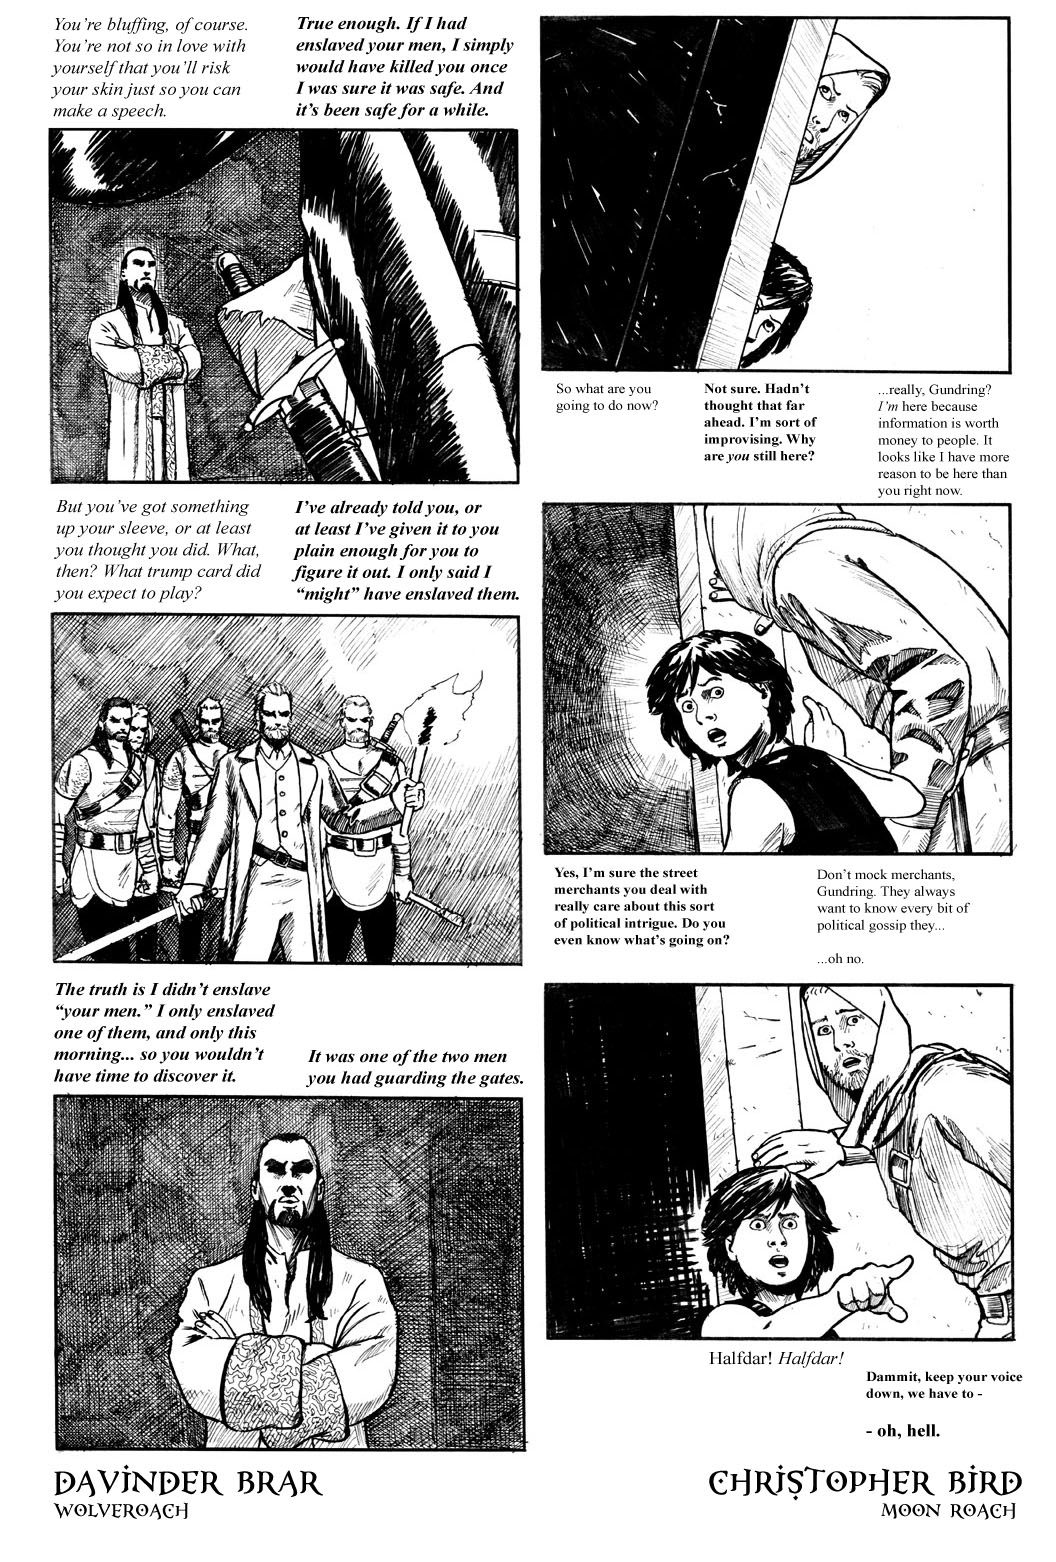 Book 3, page 22